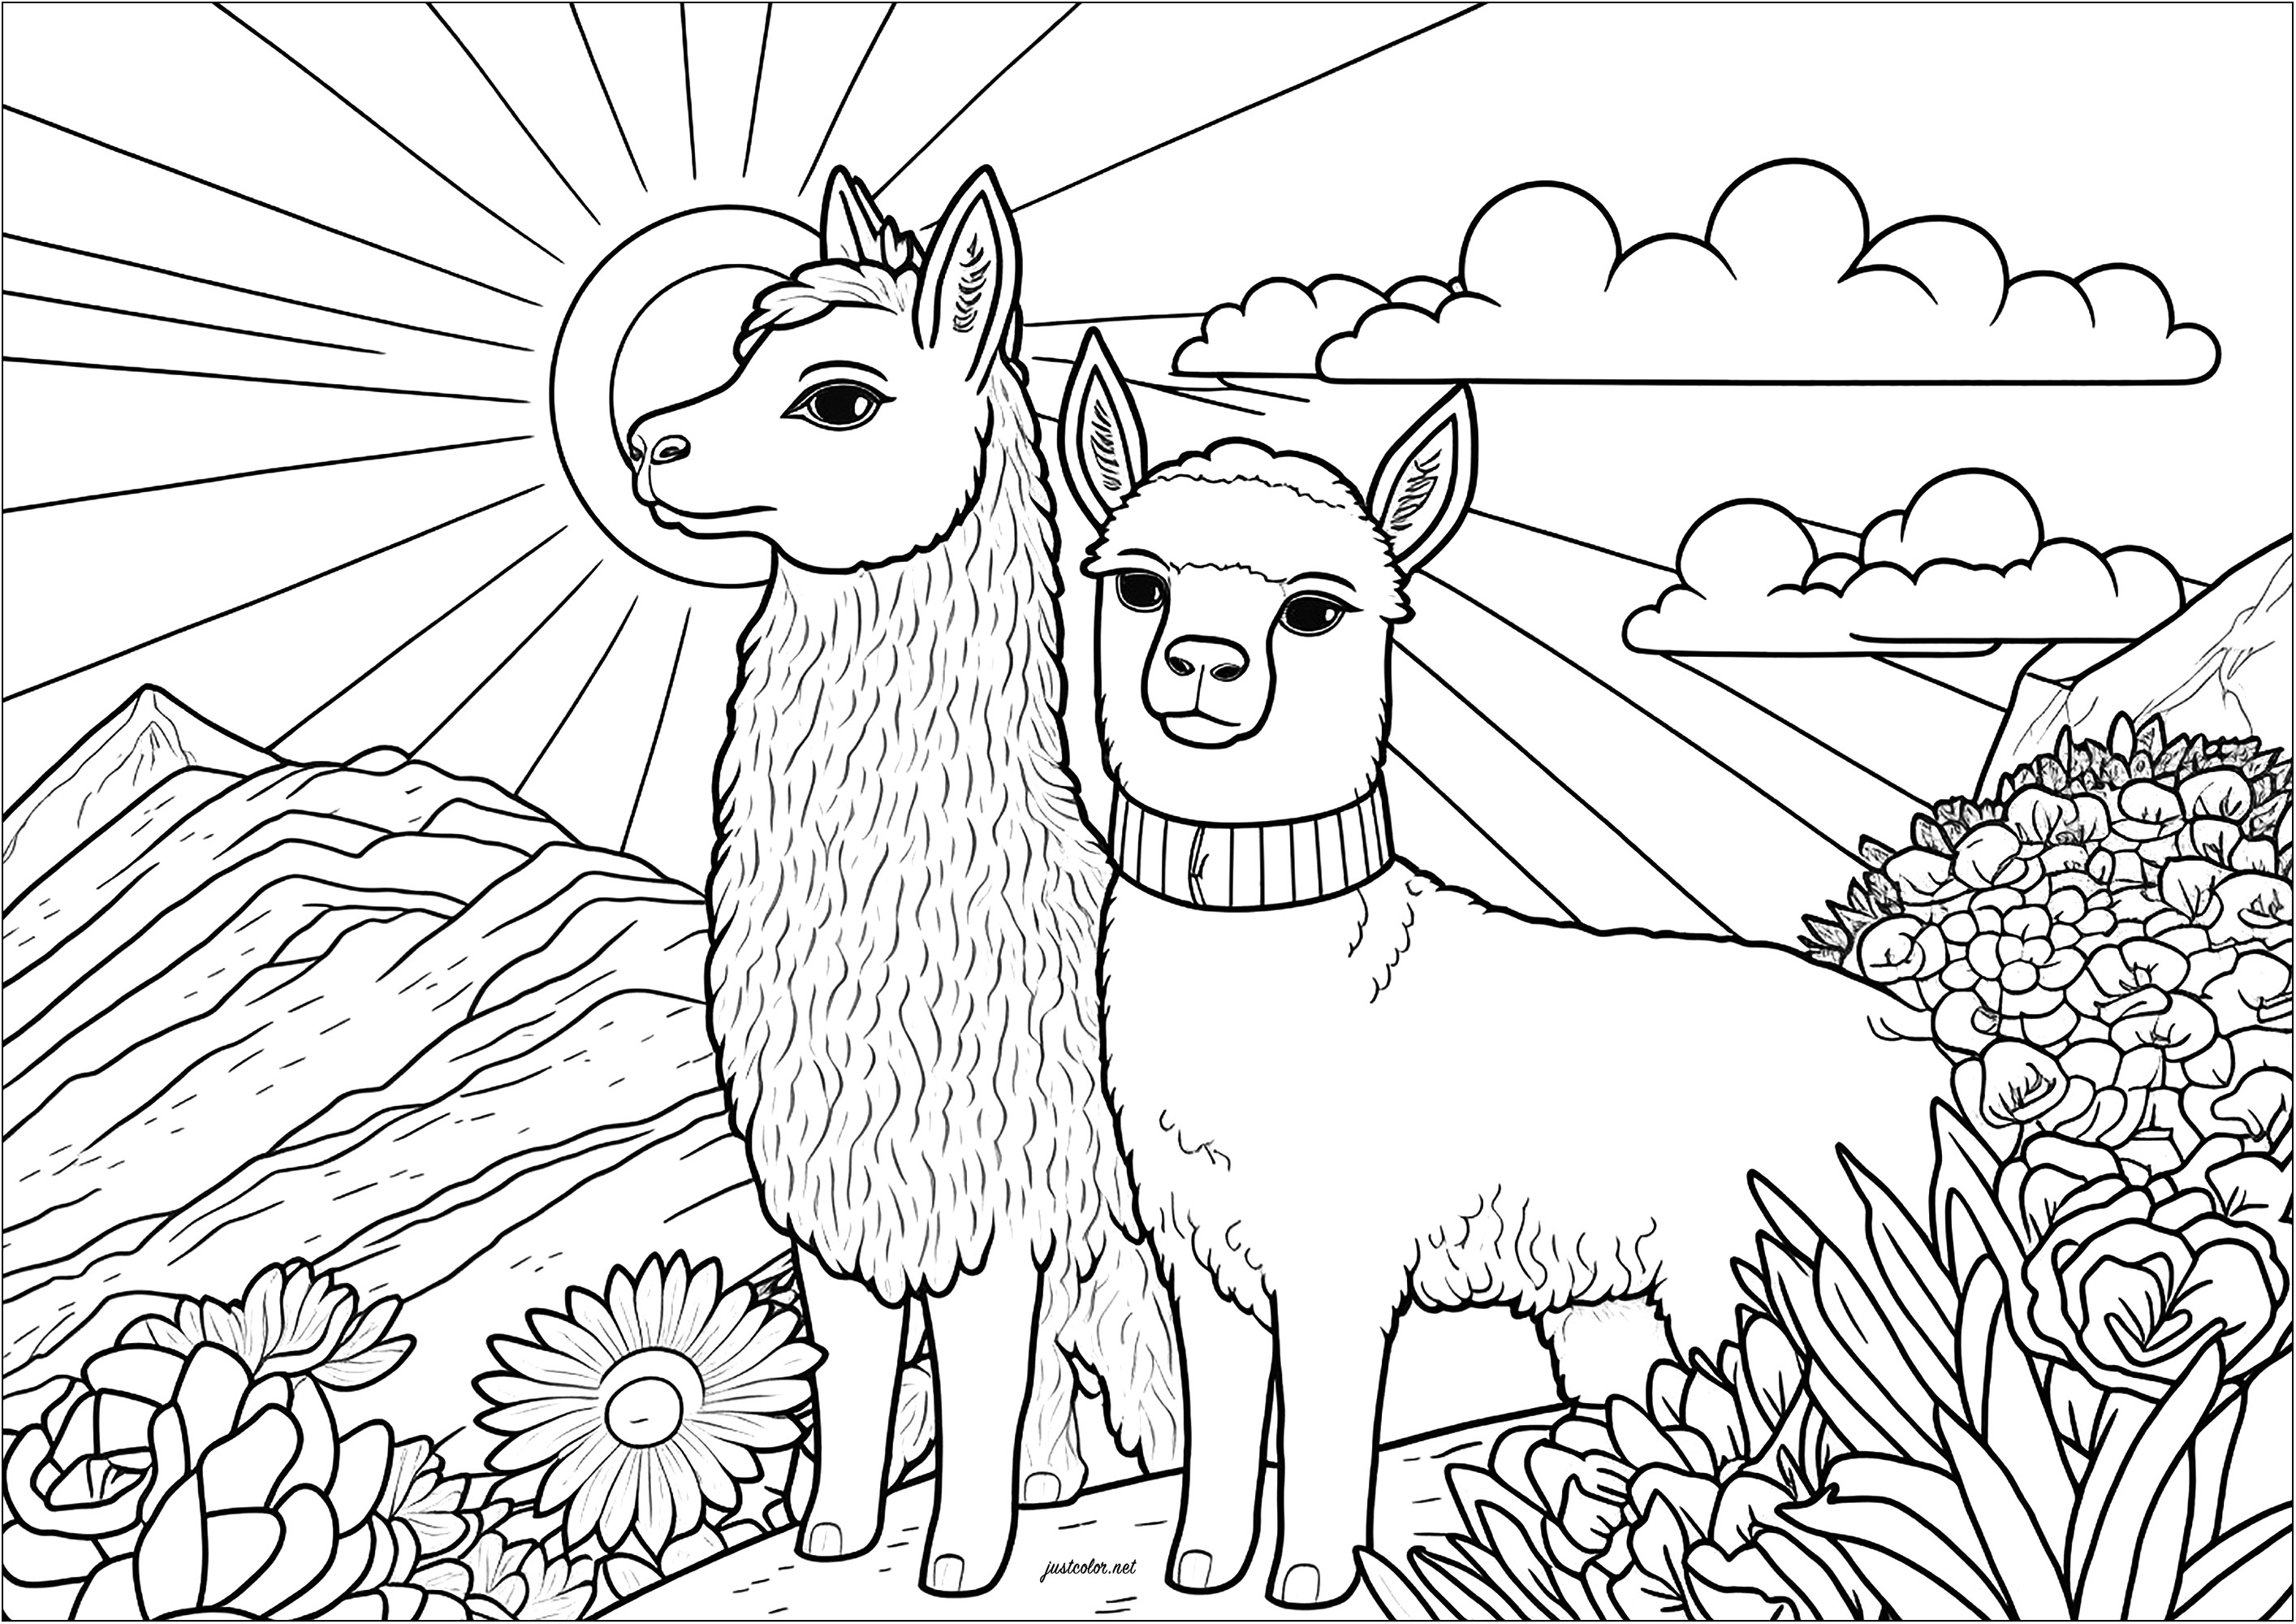 Coloring of two serious llamas. In this coloring, we see two serious llamas, standing side by side.
